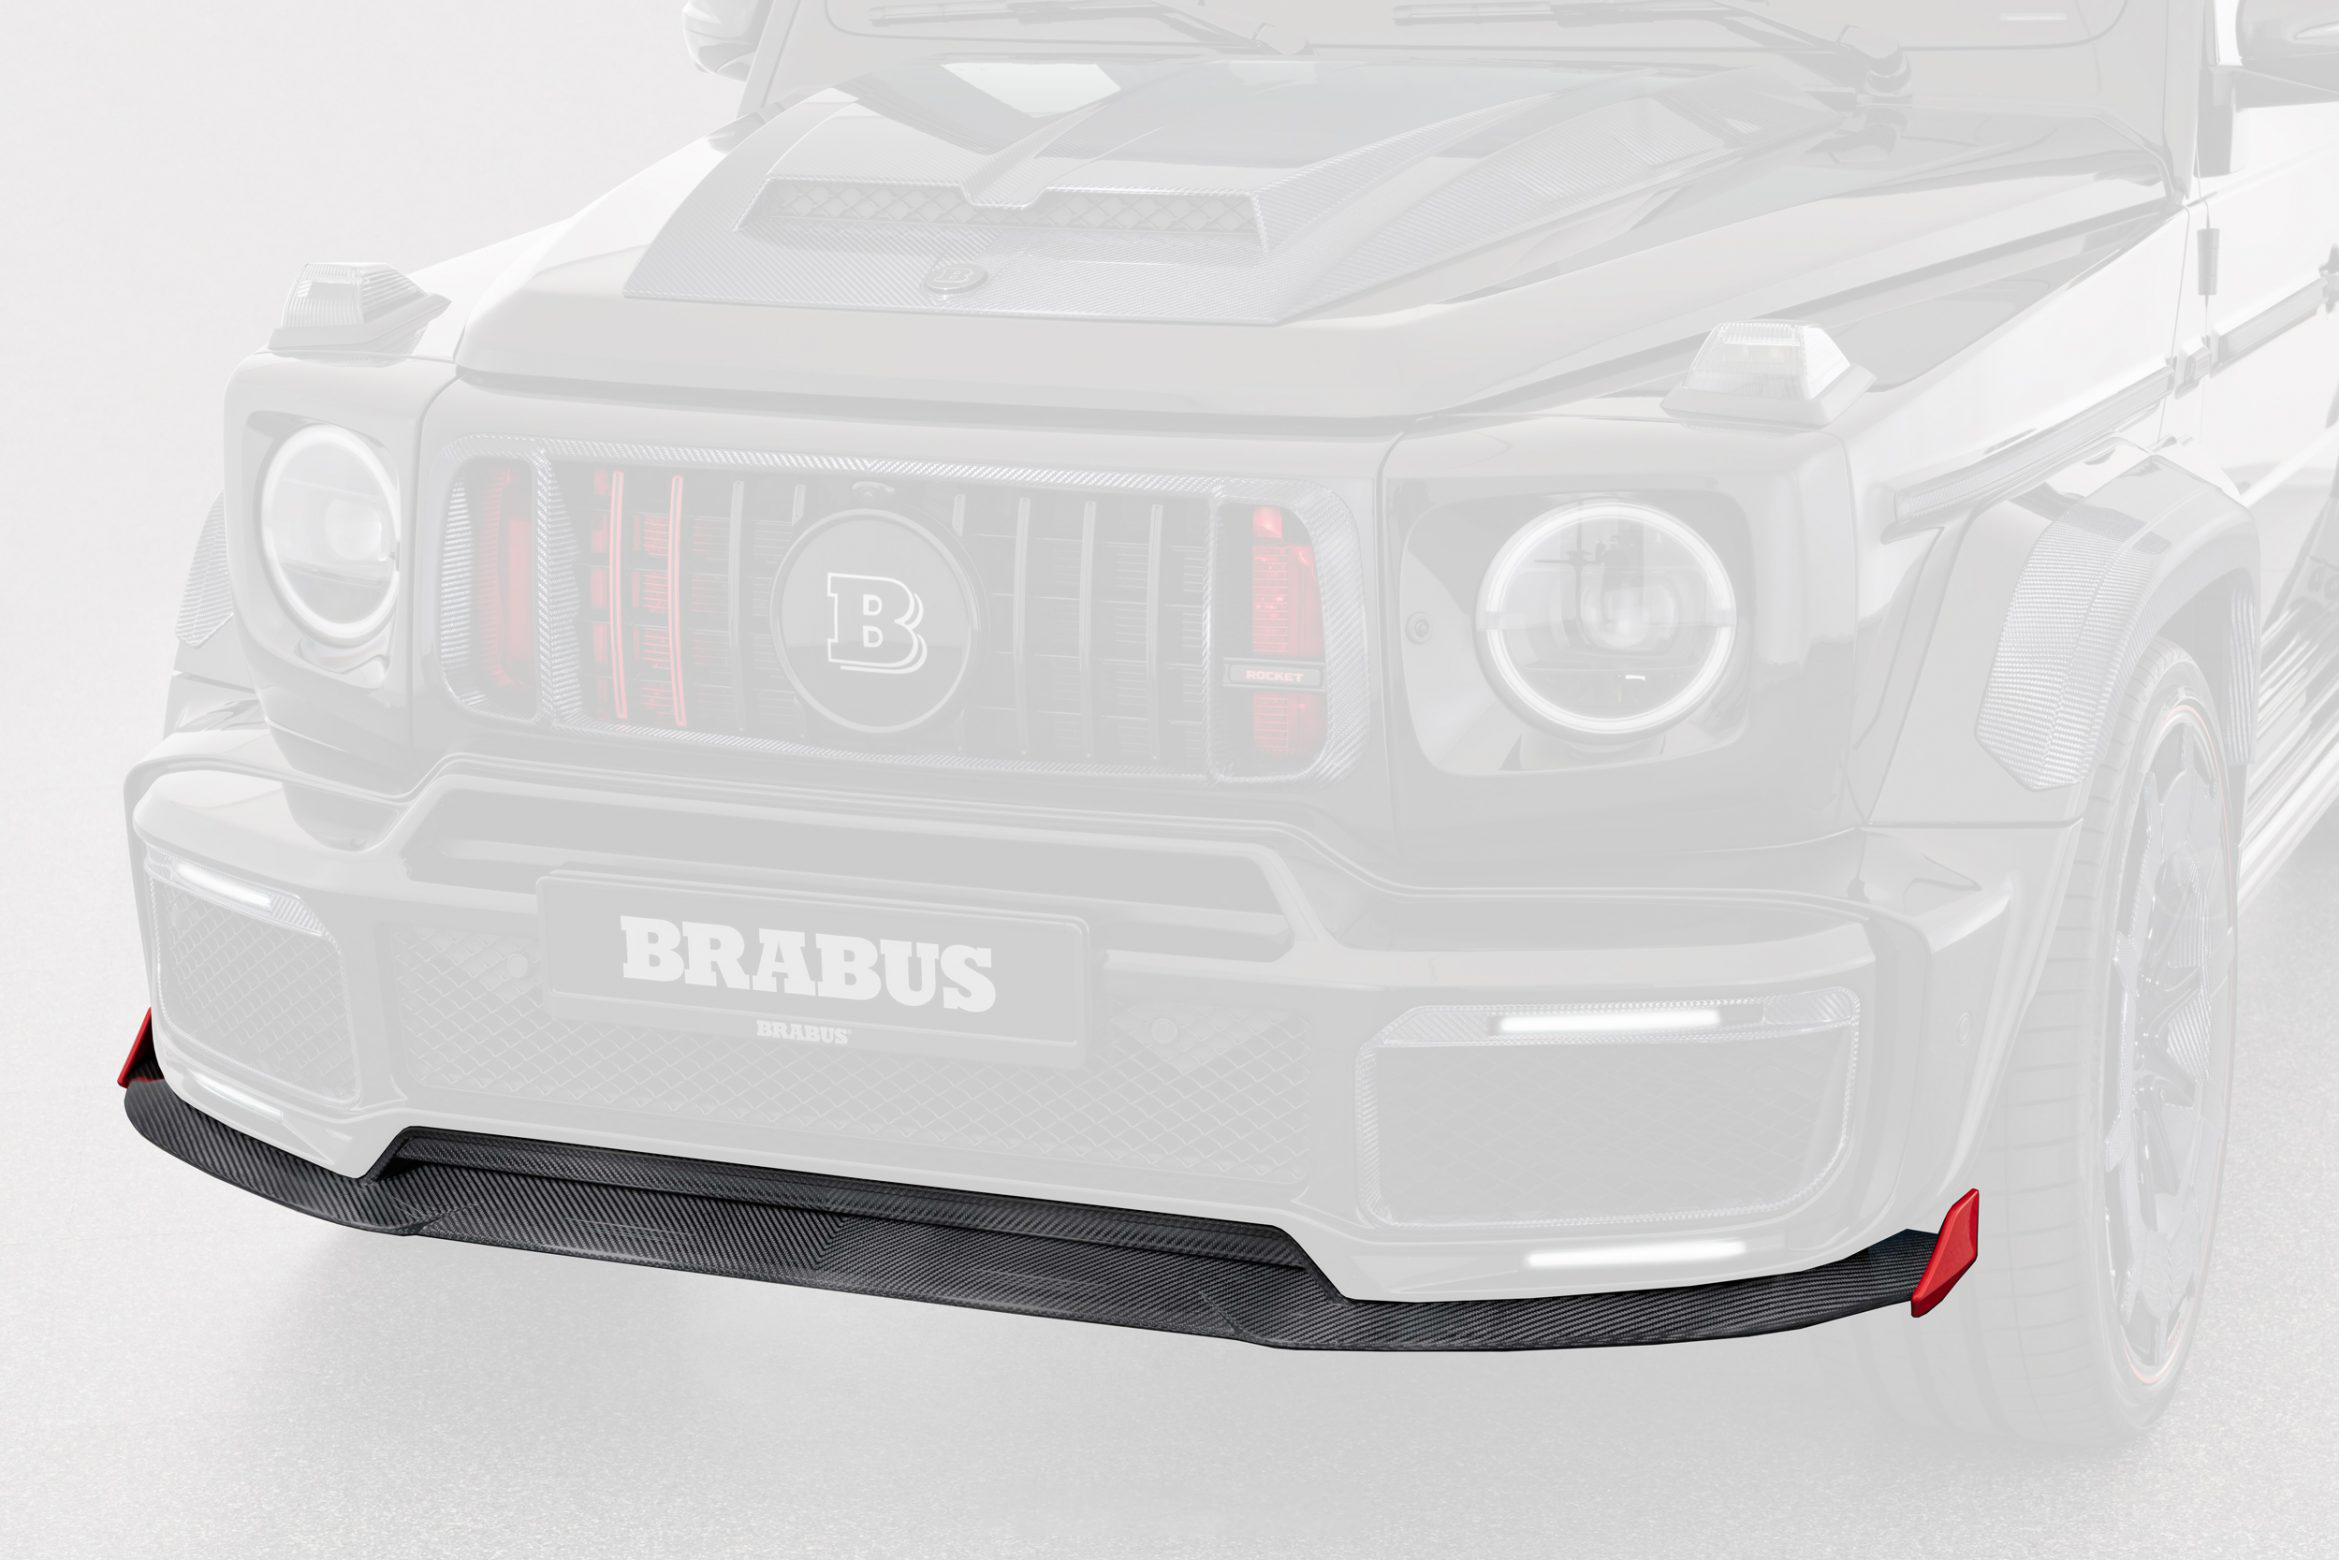 Hood Brabus Logo Buy with delivery, installation, affordable price